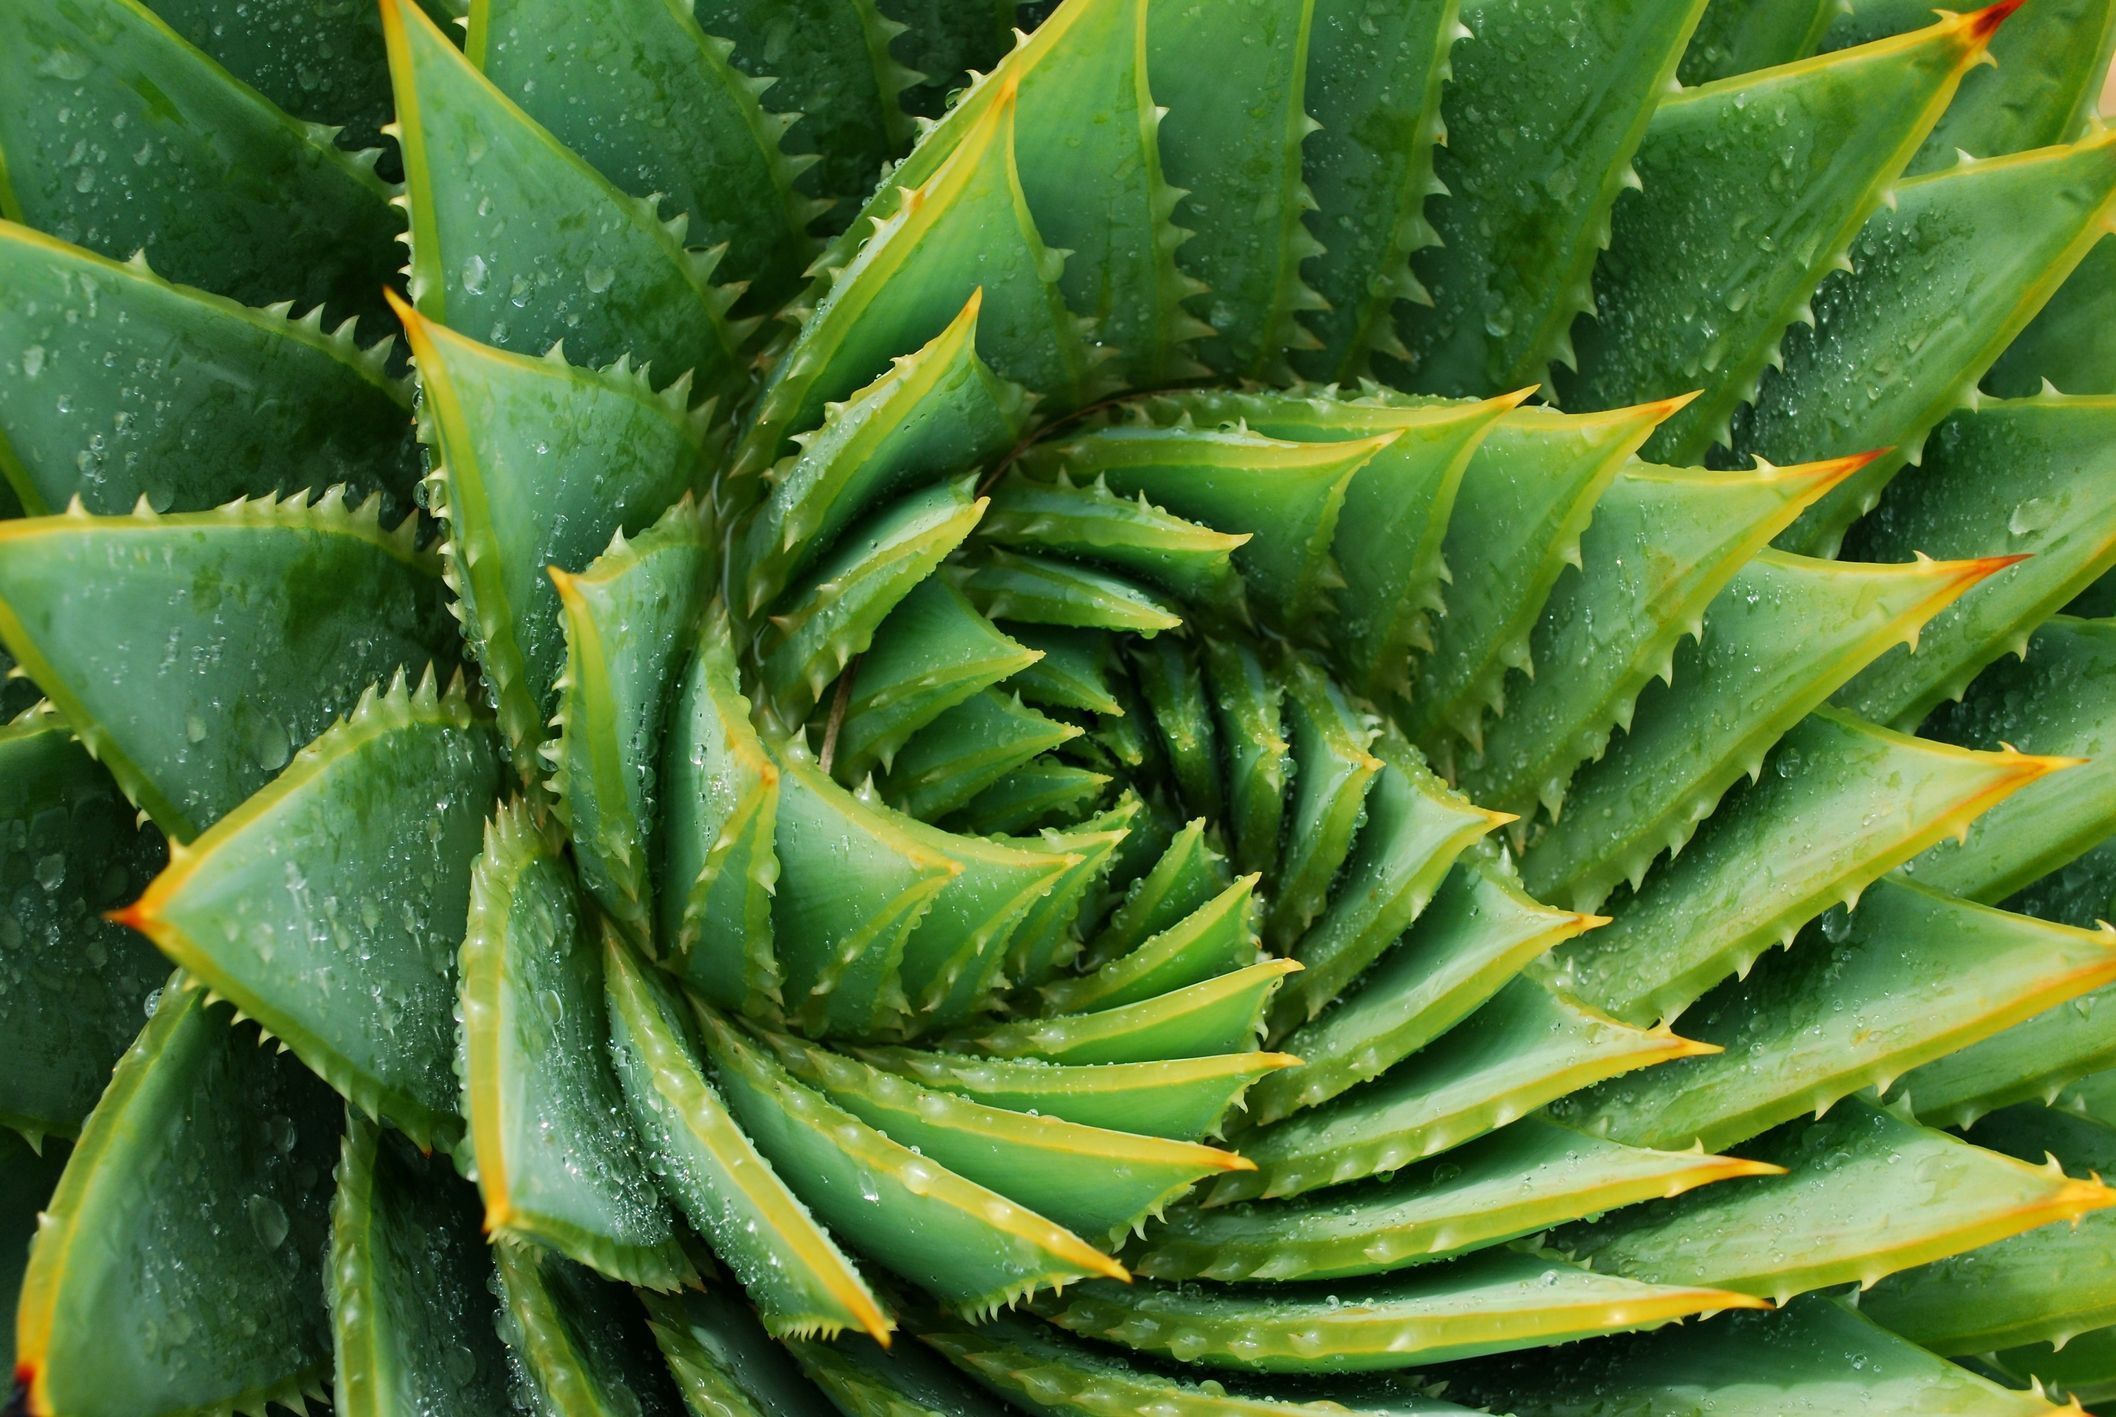 How To Grow Aloe Vera – Aloe Plant Care Indoors And Outside